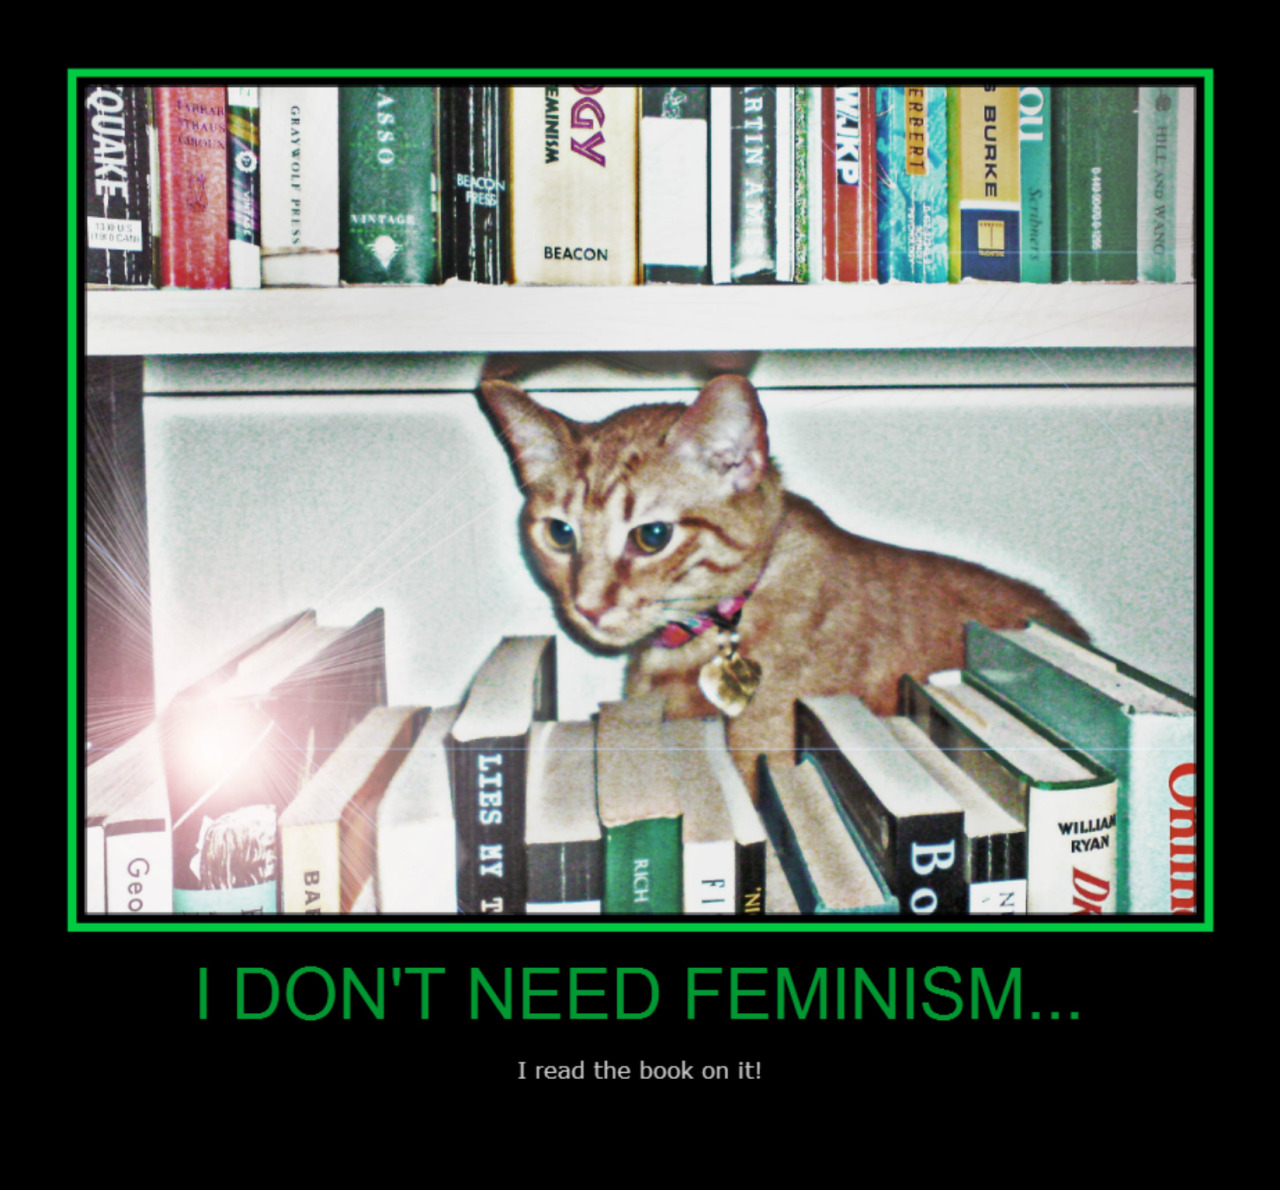 Goldie, the famous feminist author, is hiding from her adoring fan … tuna treats MAY render her approachable (for a second or two) or not.
–
Reader submission. Confused Cats Against Feminism is brought to you by We Hunted the Mammoth, and by YOUR...